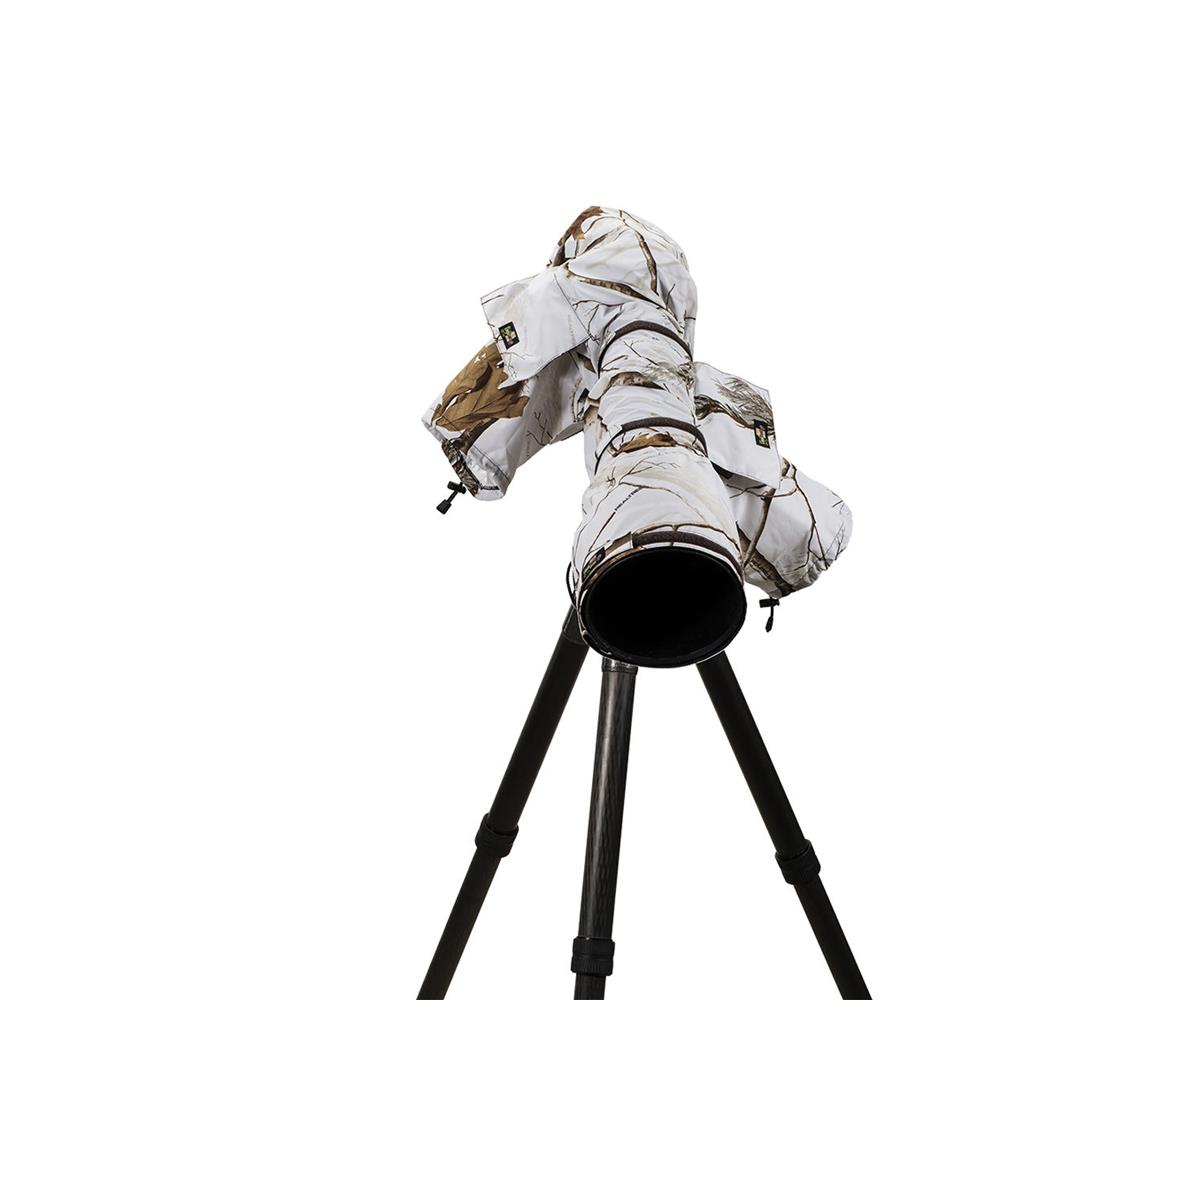 Image of LensCoat RainCoat 2 Pro for DSLRs with 200 to 400mm f/2.8